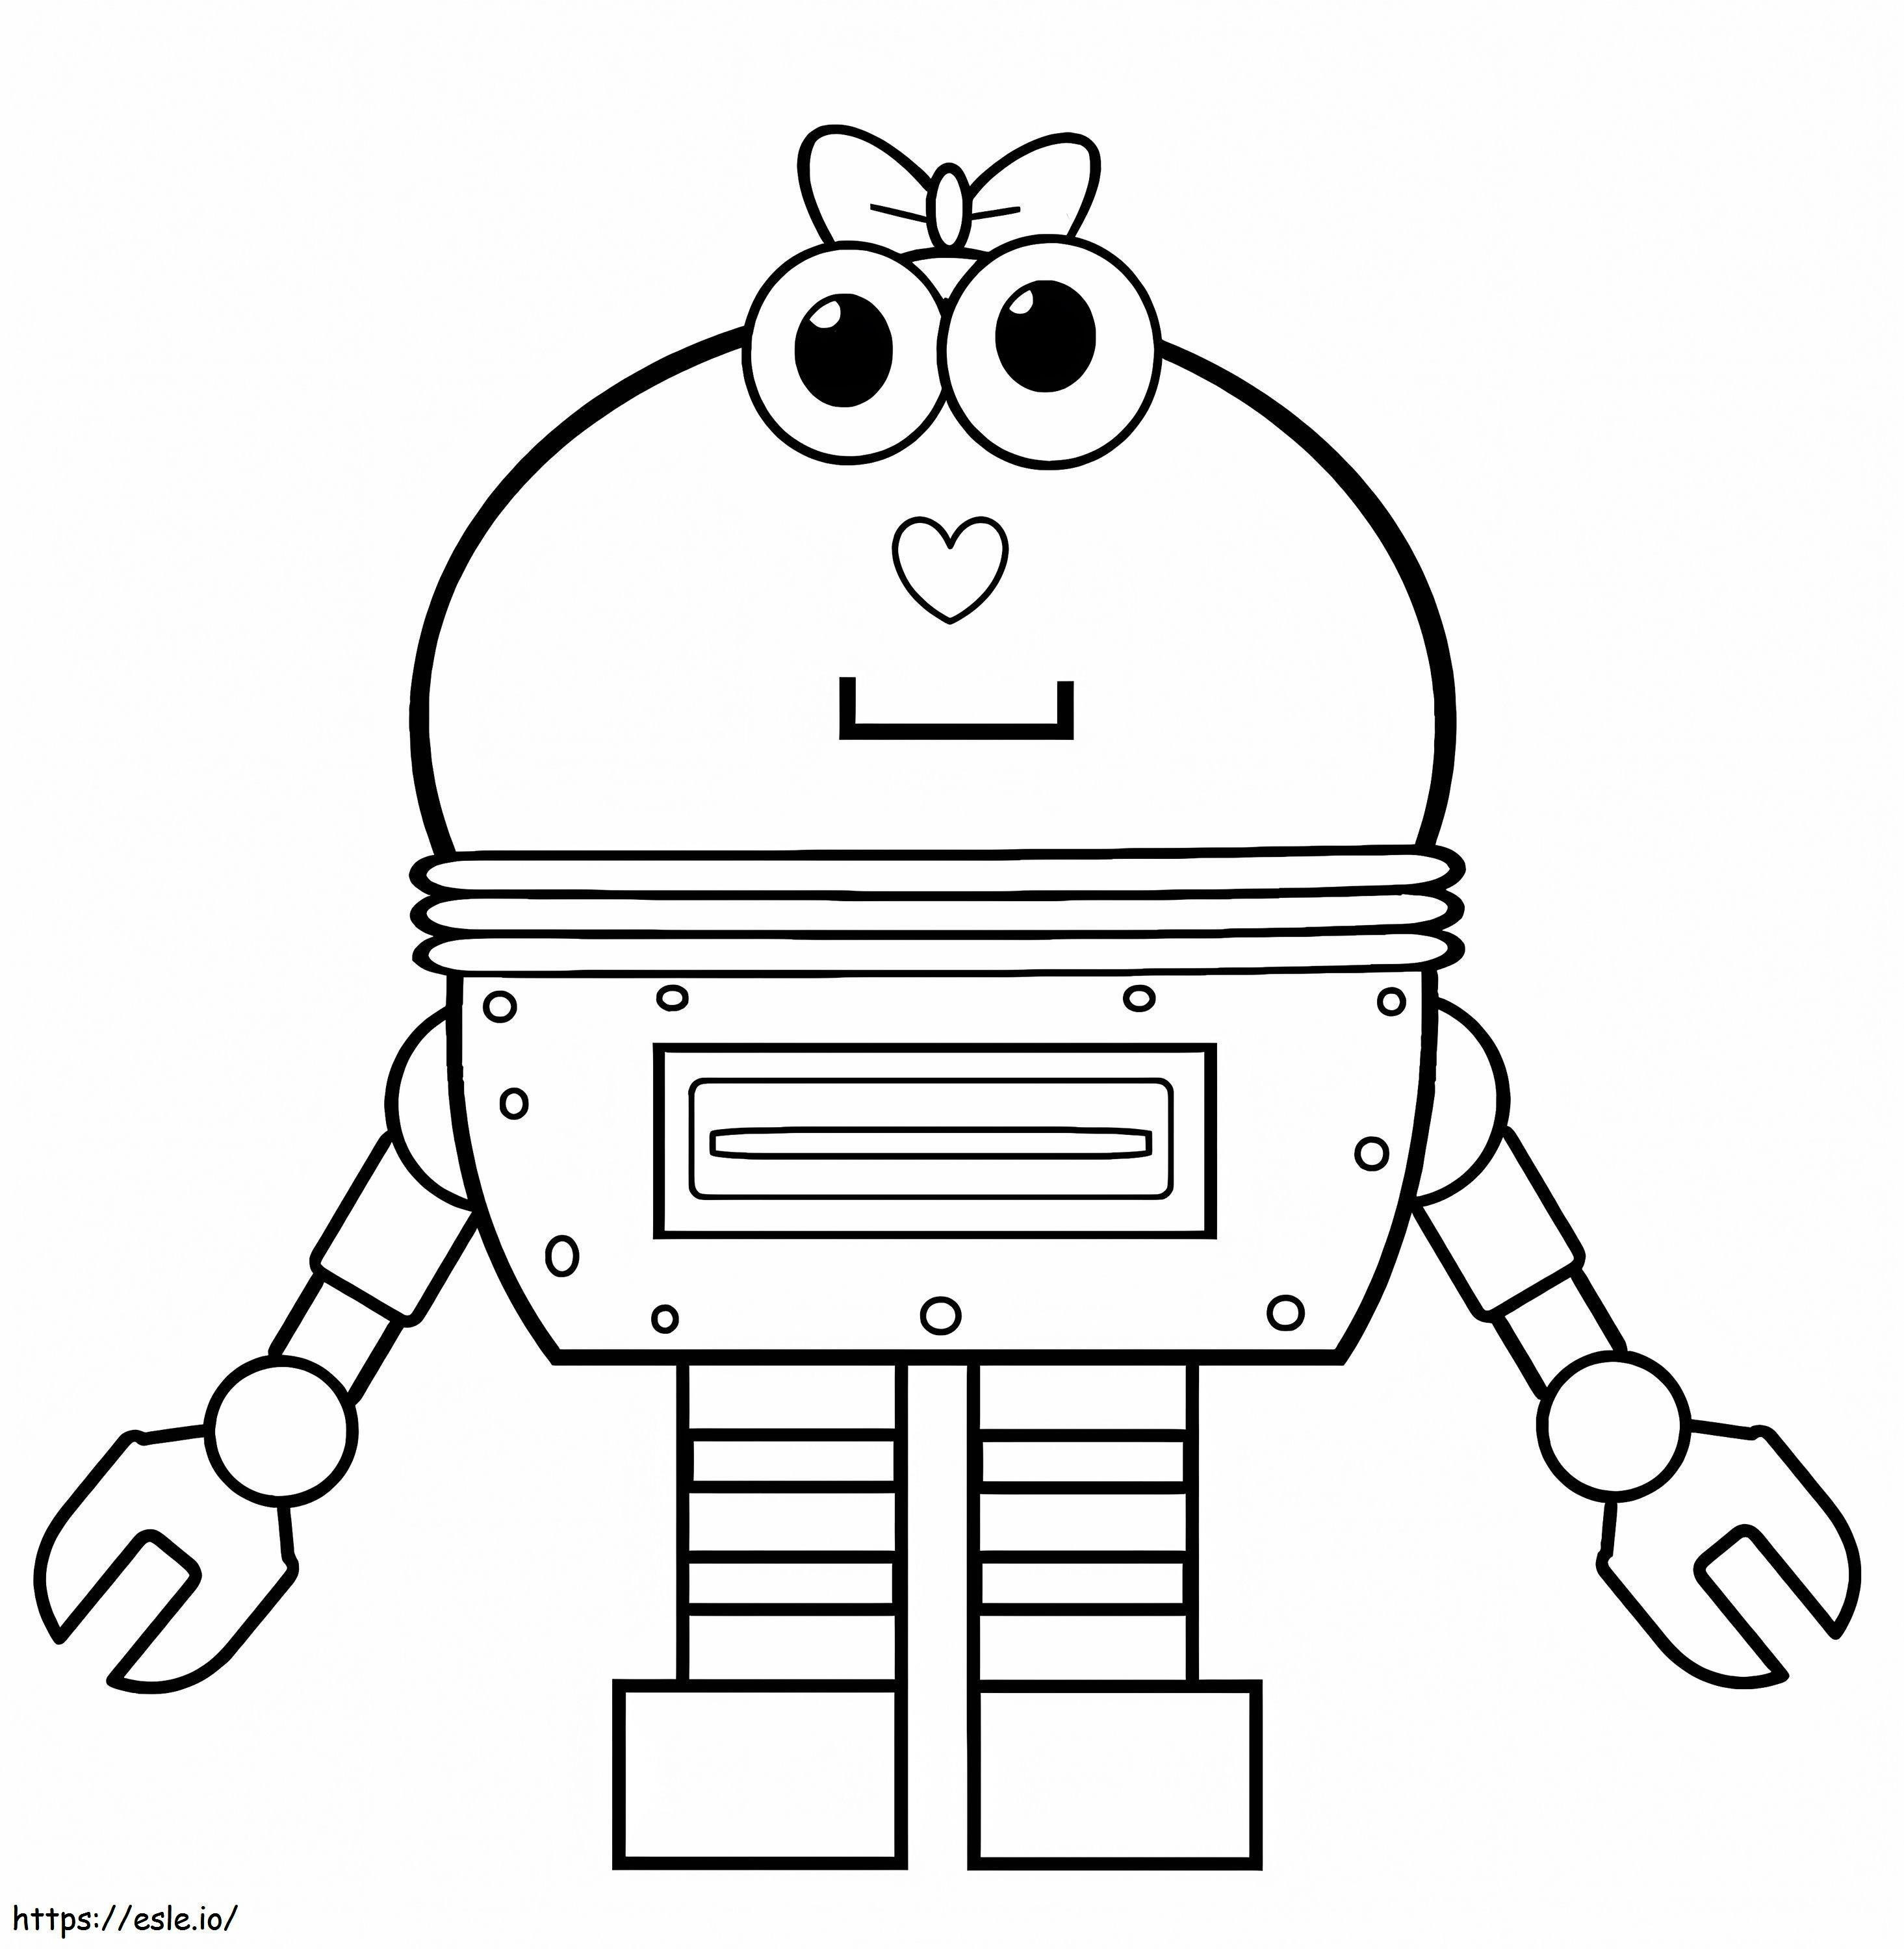 Lovely Robot coloring page